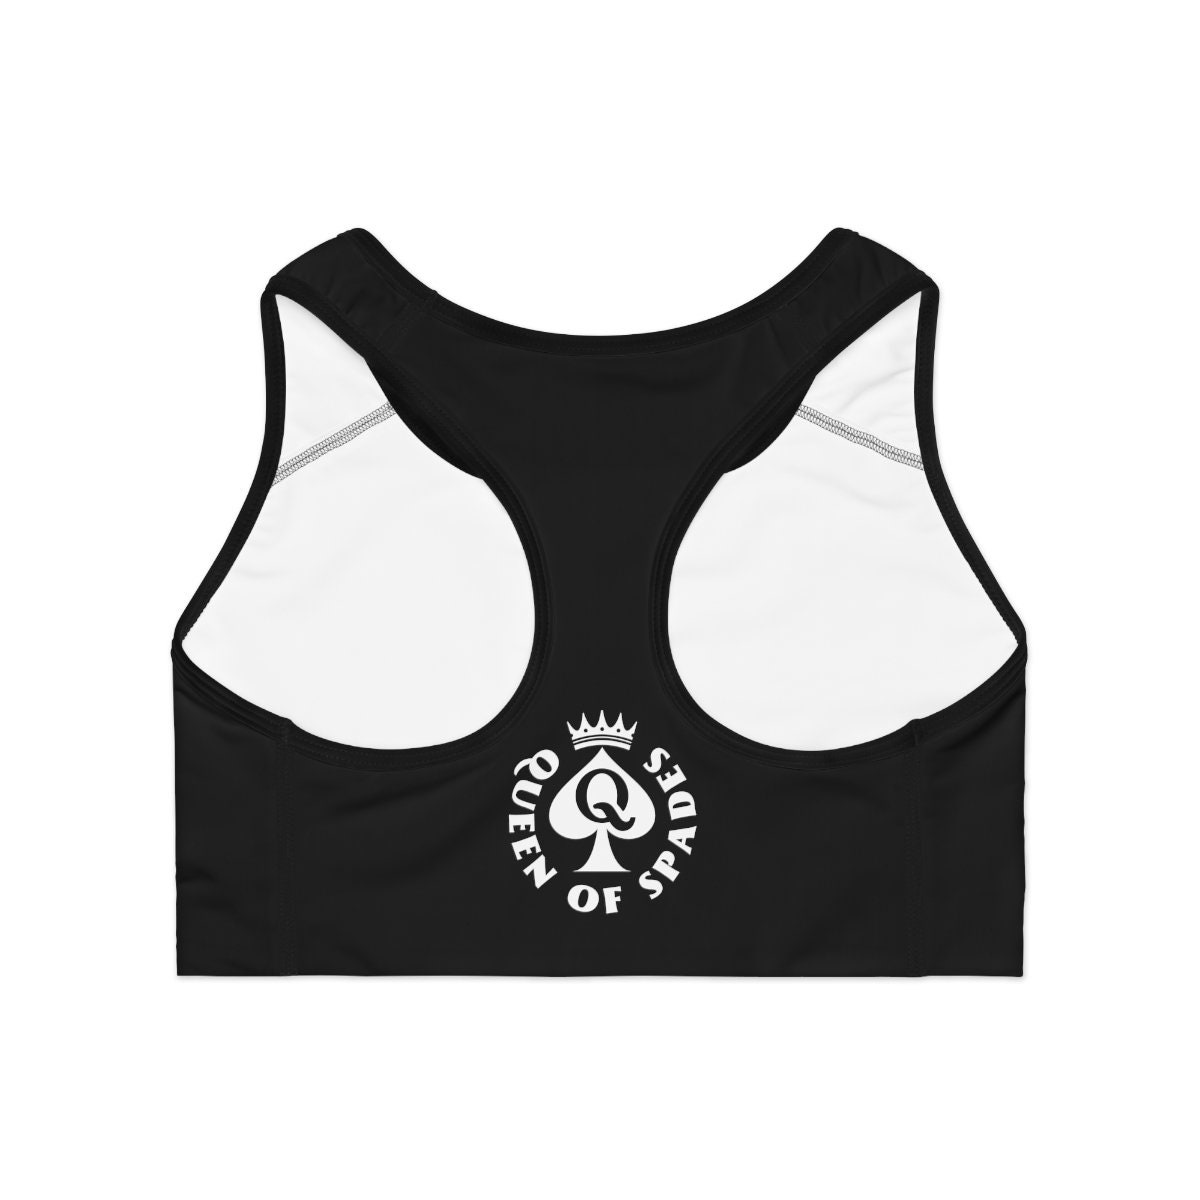 Queen of Spades Sports Bra Black and White - Etsy